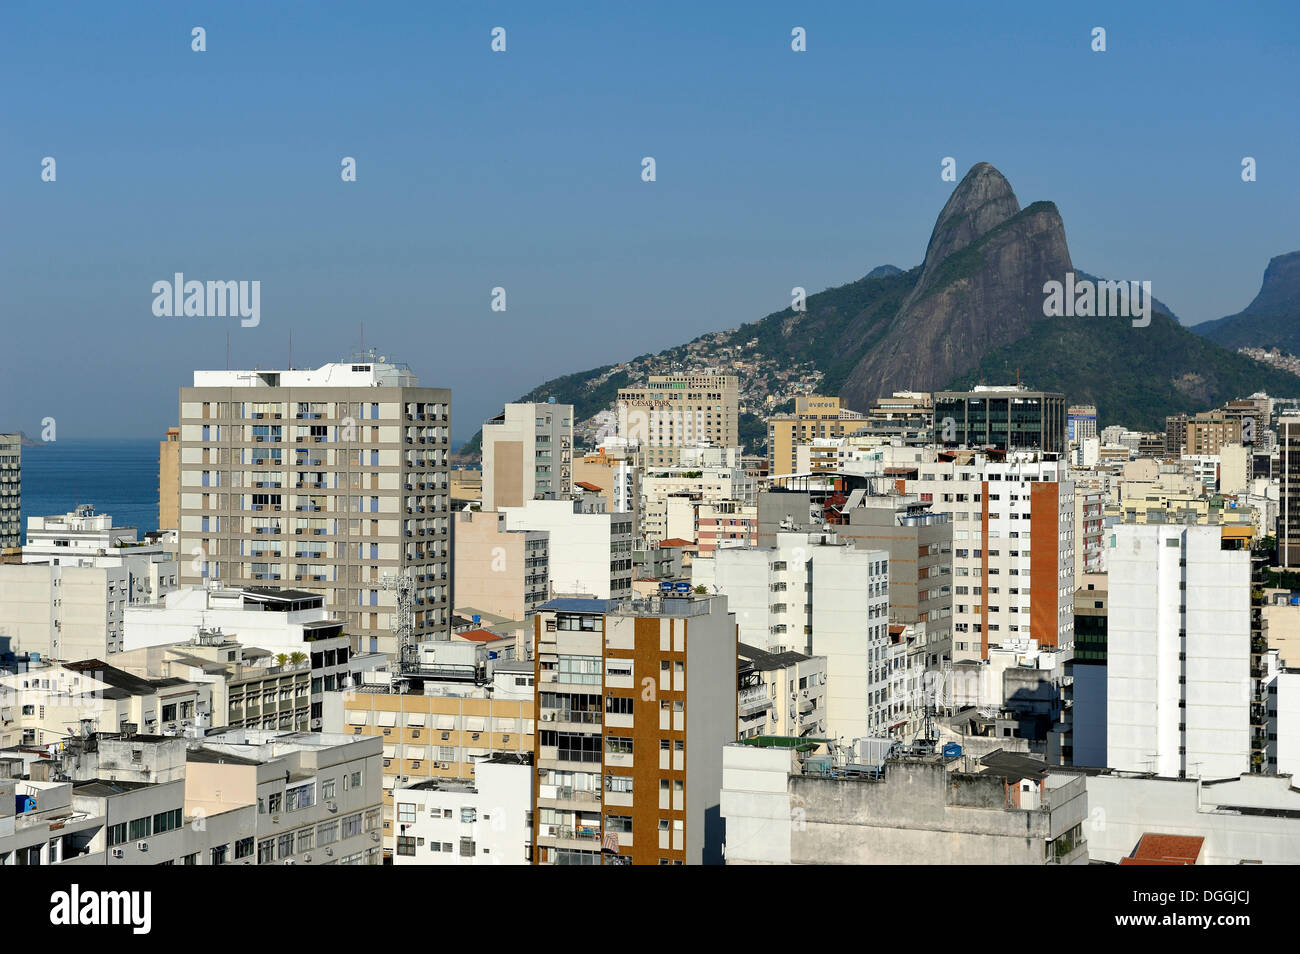 Skyscrapers in the Ipanema district with a view towards Morro Dois Irmaos or Two Brothers Mountain, Rio de Janeiro, Brazil Stock Photo